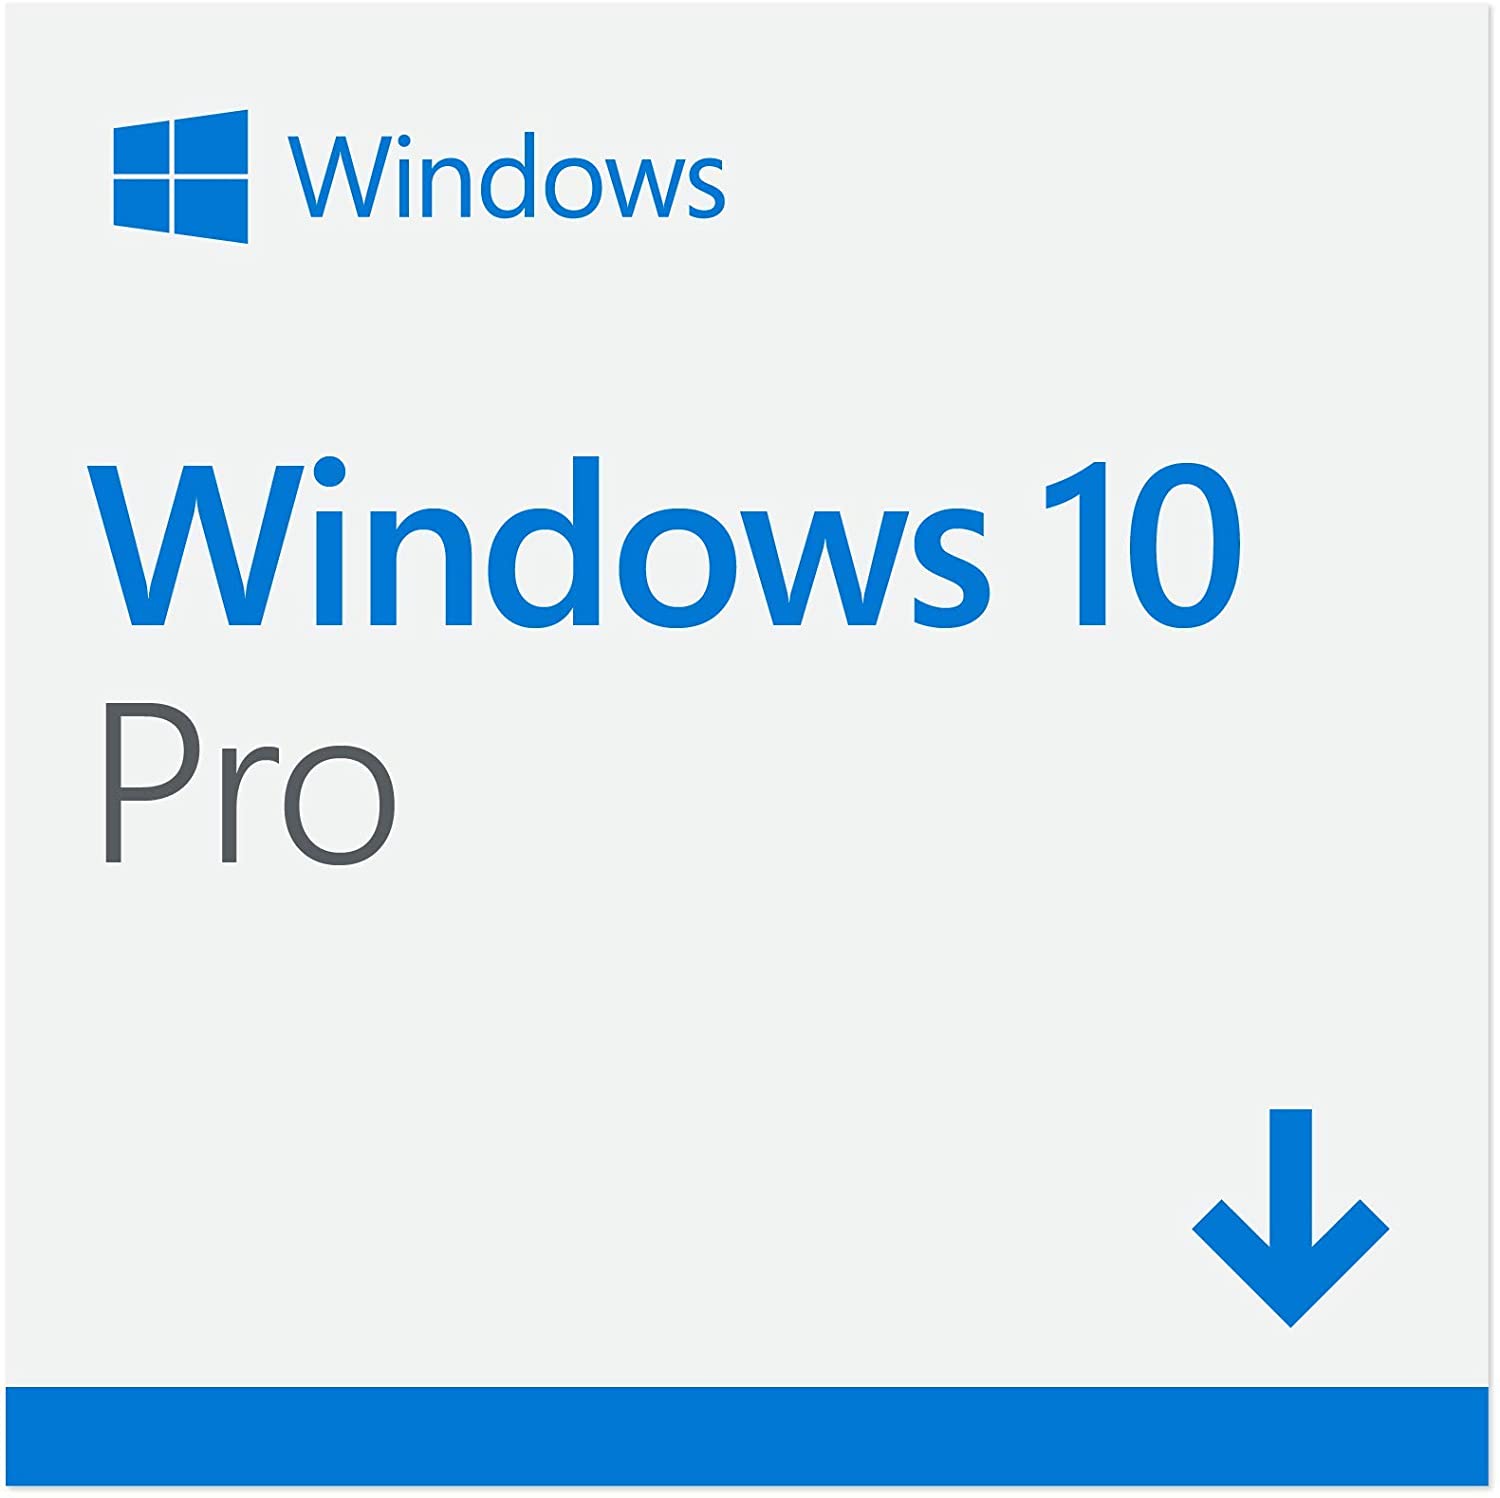 windows 10 pro free download with product key